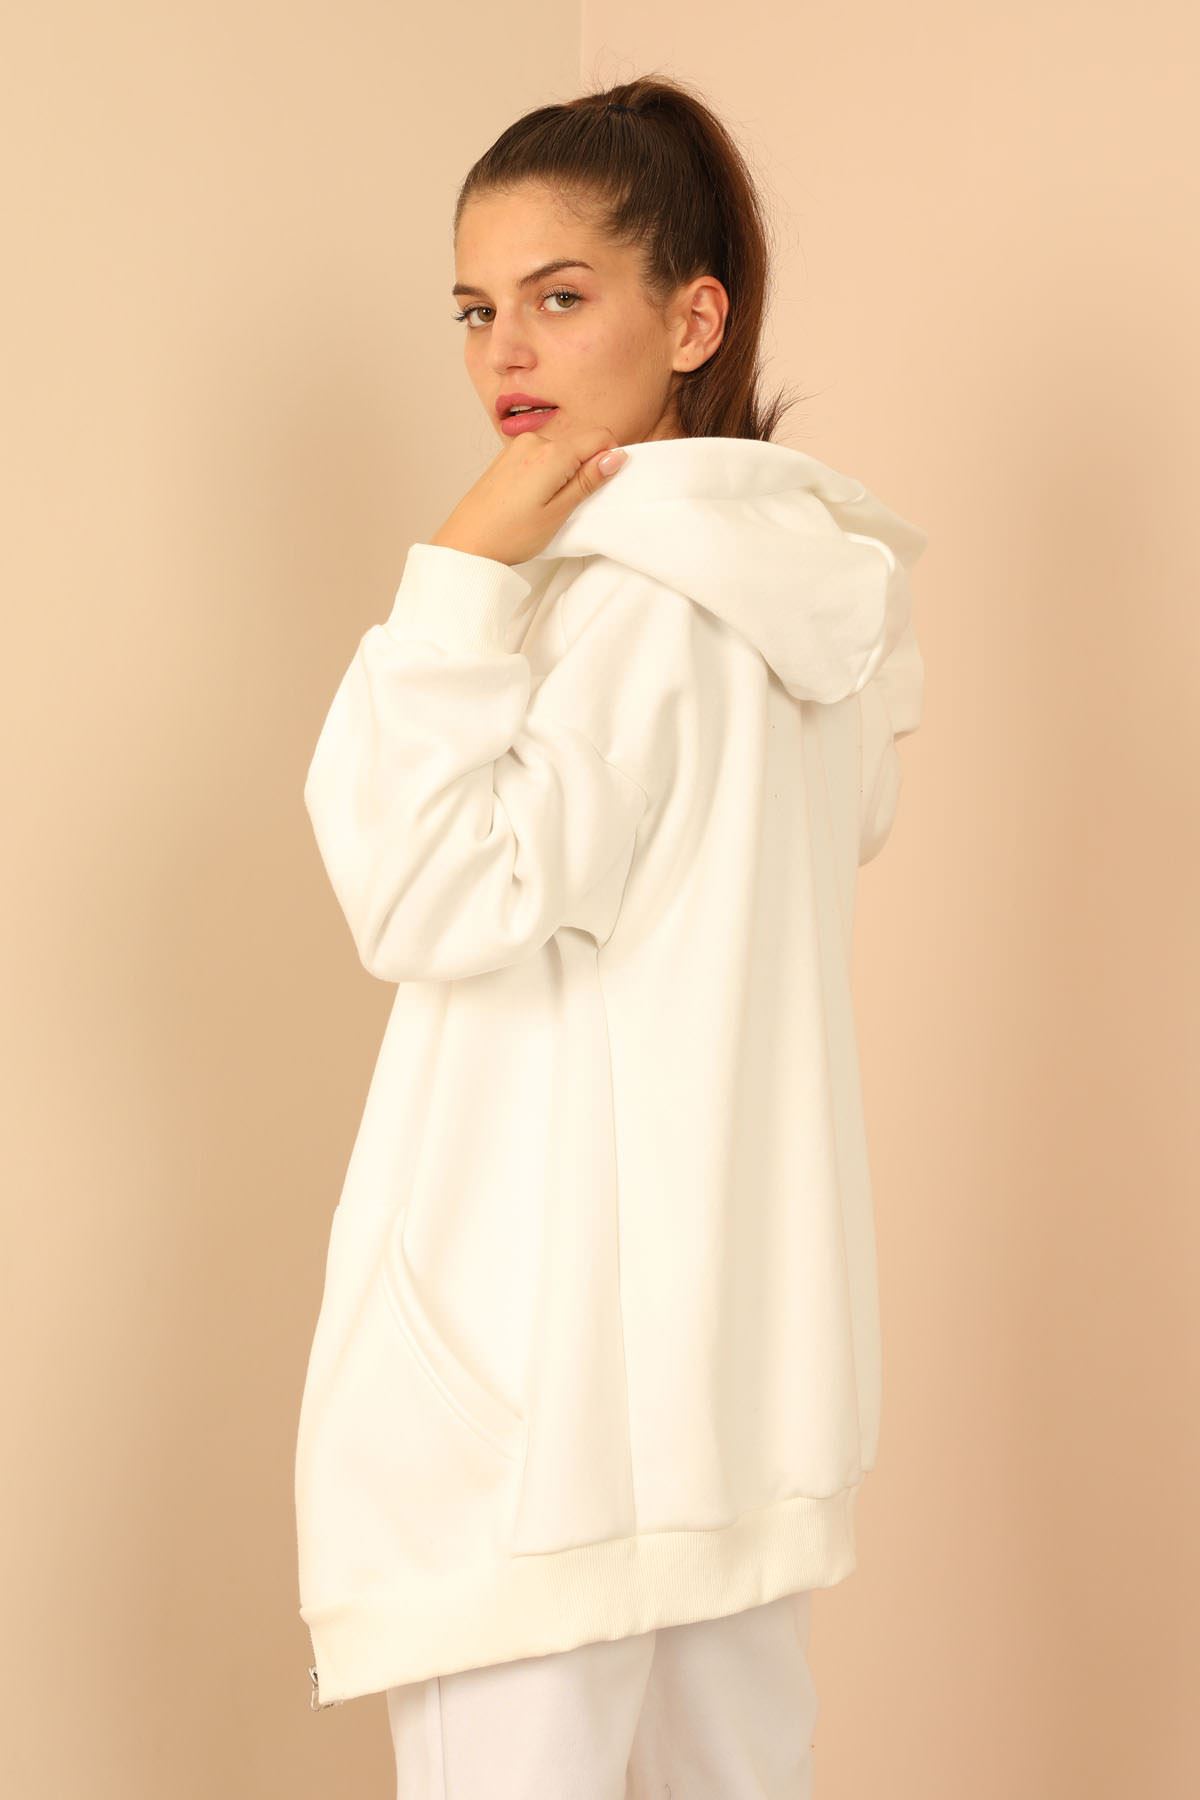 Third Knit With Wool İnside Fabric Hooded Below Hip Oversize Women Sweatshirt With Zip - White